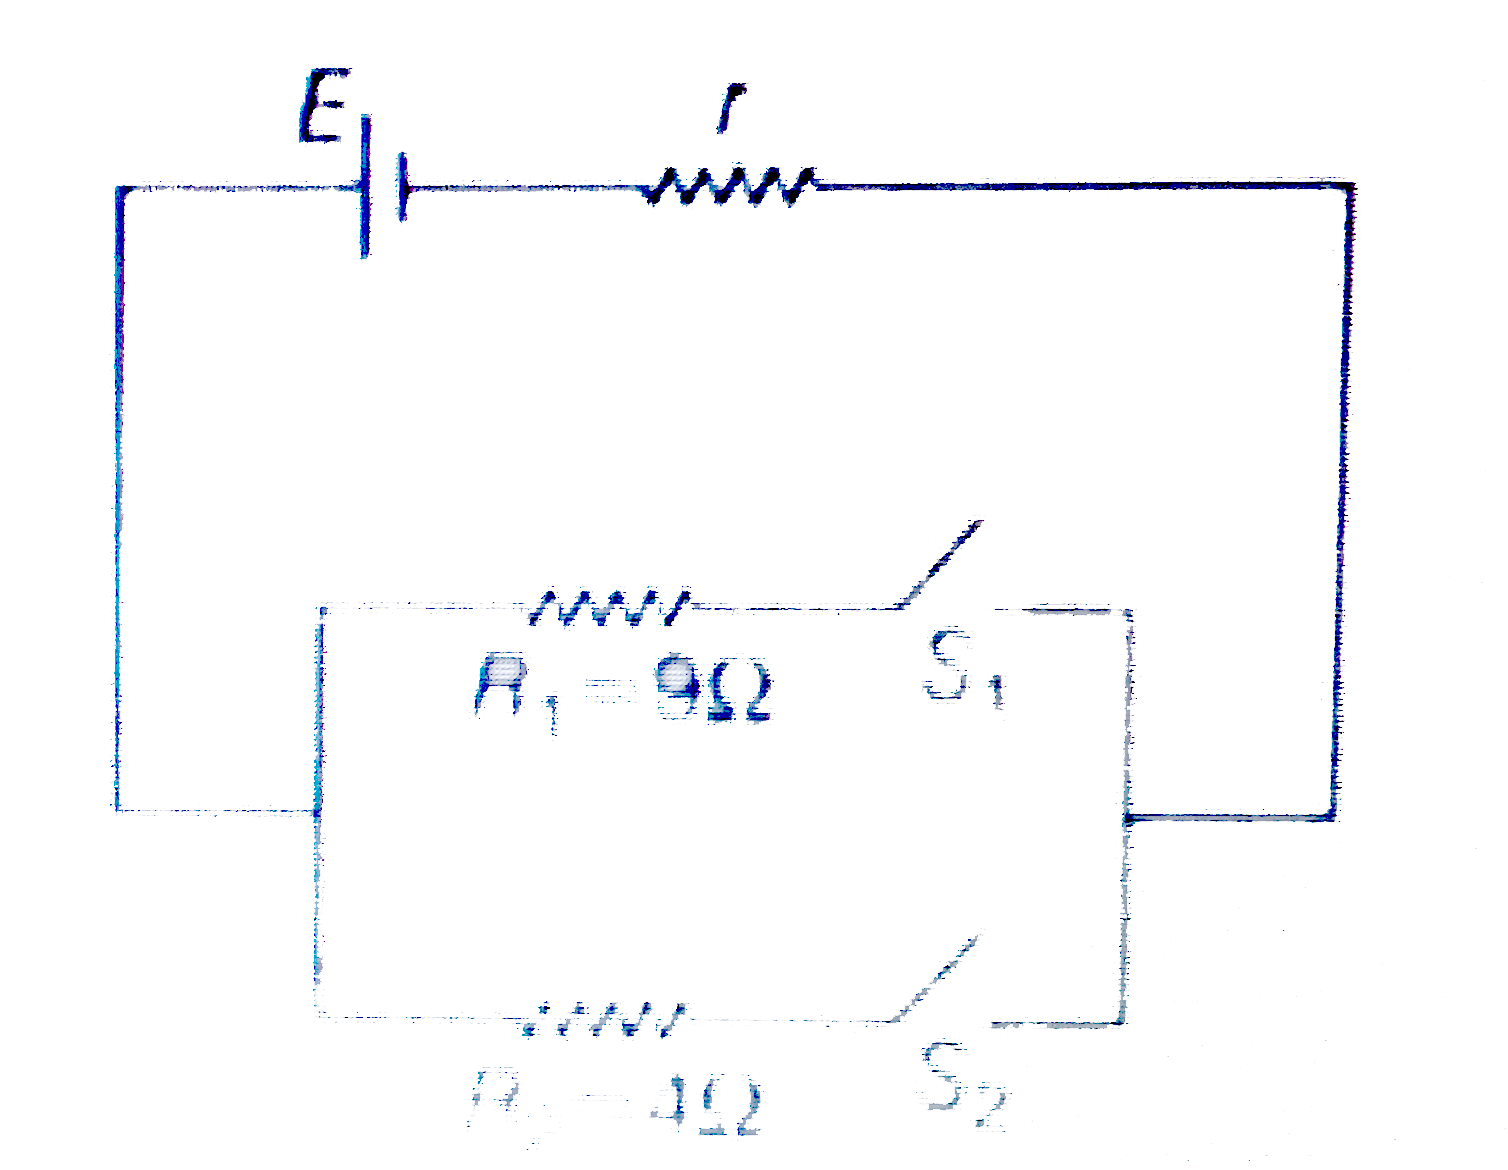 In the given circuit the power dissipated through resistance R(1) = 9 Omega is P(1), when switch S(1) is closed and S(2) is opened and the power dissipated through resistance R(2) = 4 Omega is P(2), when switch S(2) is closed and S(1) is opened. If P(1) = P(2), then r is equl to :